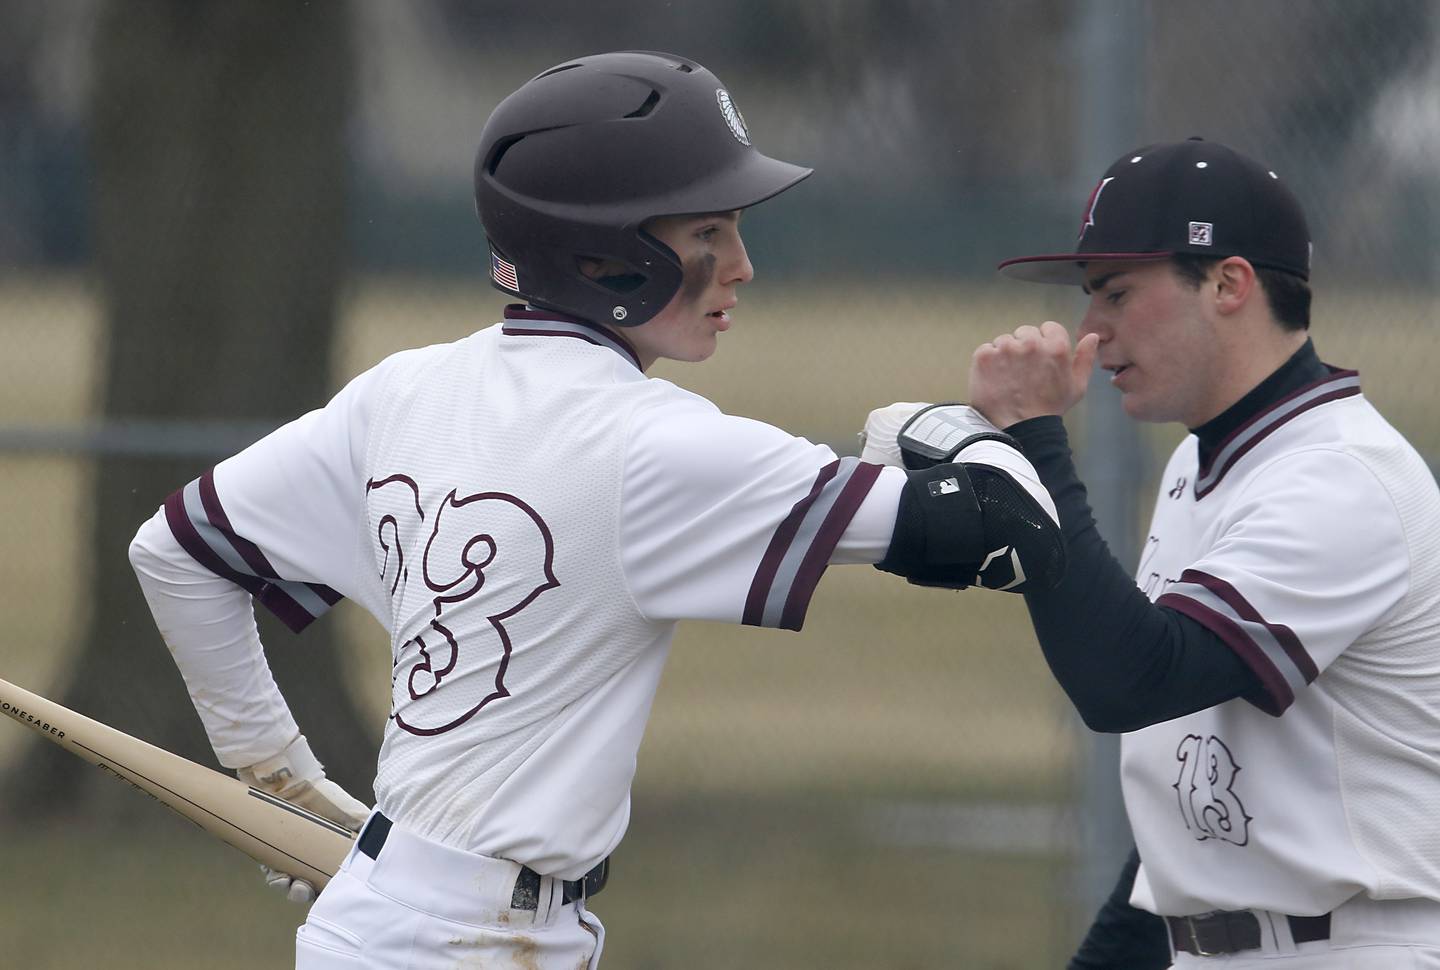 Marengo's Carter Heimsoth bumps his teammates Marengo's Ty Sierpien’s arm after scoring a run during a non-conference baseball game Wednesday, March 30, 2022, between Marengo and Hampshire at Marengo High School.